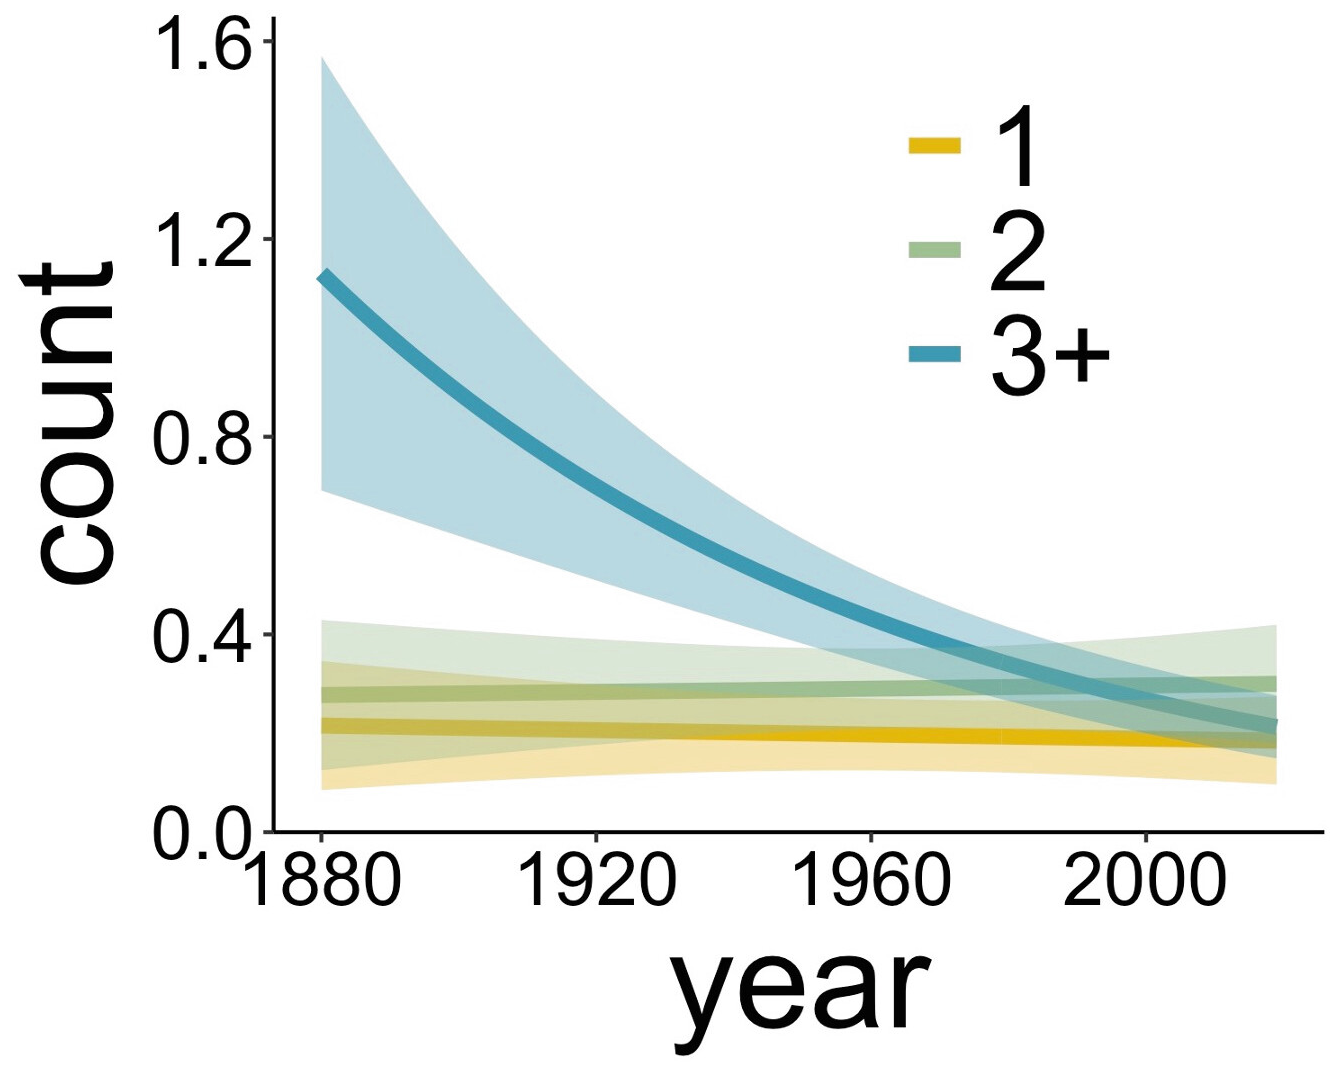 Estimated ocean parasite populations in the Puget Sound, 1880-2019. The count per host of ocean parasites that obligately require three or more hosts declined through time, while that of two- and one-host parasites remained stable. Shown are model predictions between the years 1880 and 2019 from phase 1 analysis. Predictions are for the “average” parasite species within each group (i.e., within 1-host parasites, 2-host parasites, and 3+-host parasites) where average is defined as “the parasite species with the abundance that is closest to the average abundance of all parasite species.” Graphic: Wood, et al., 2023 / PNAS